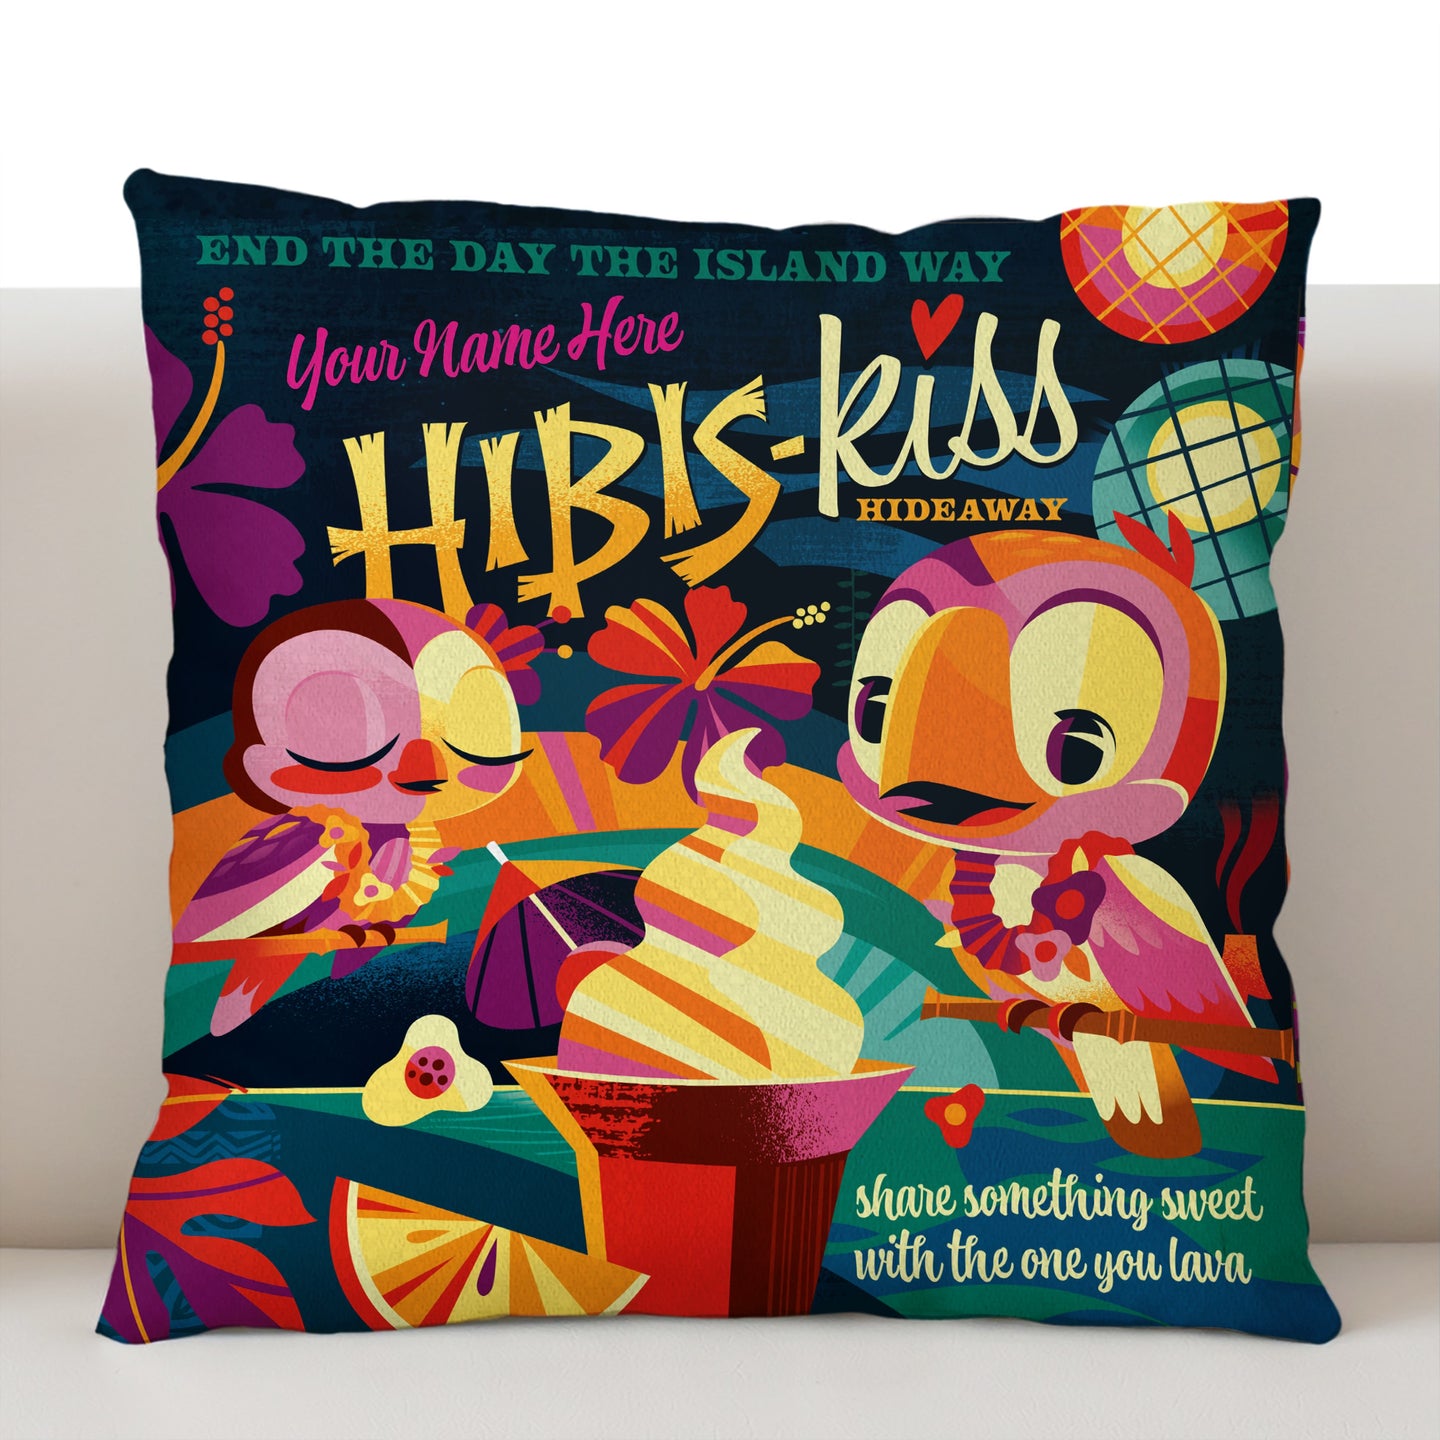 Hibis-Kiss Hideaway Personalized Pillow Cover - Limited Time Pre-Order